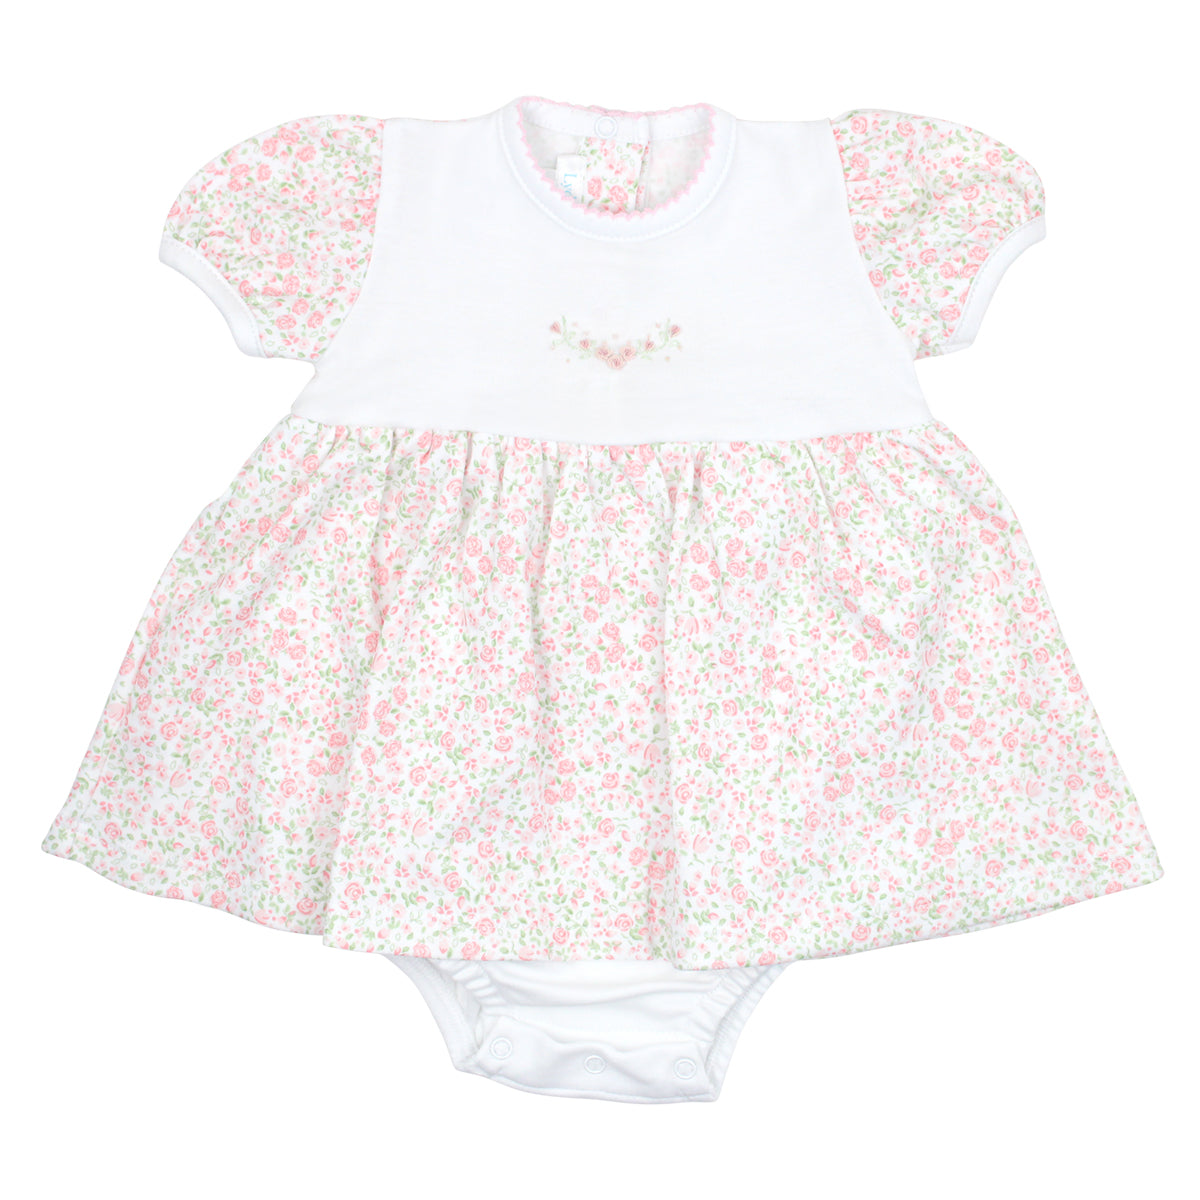 Roses Garden Embroidery and Printed Dress | Baby Girl